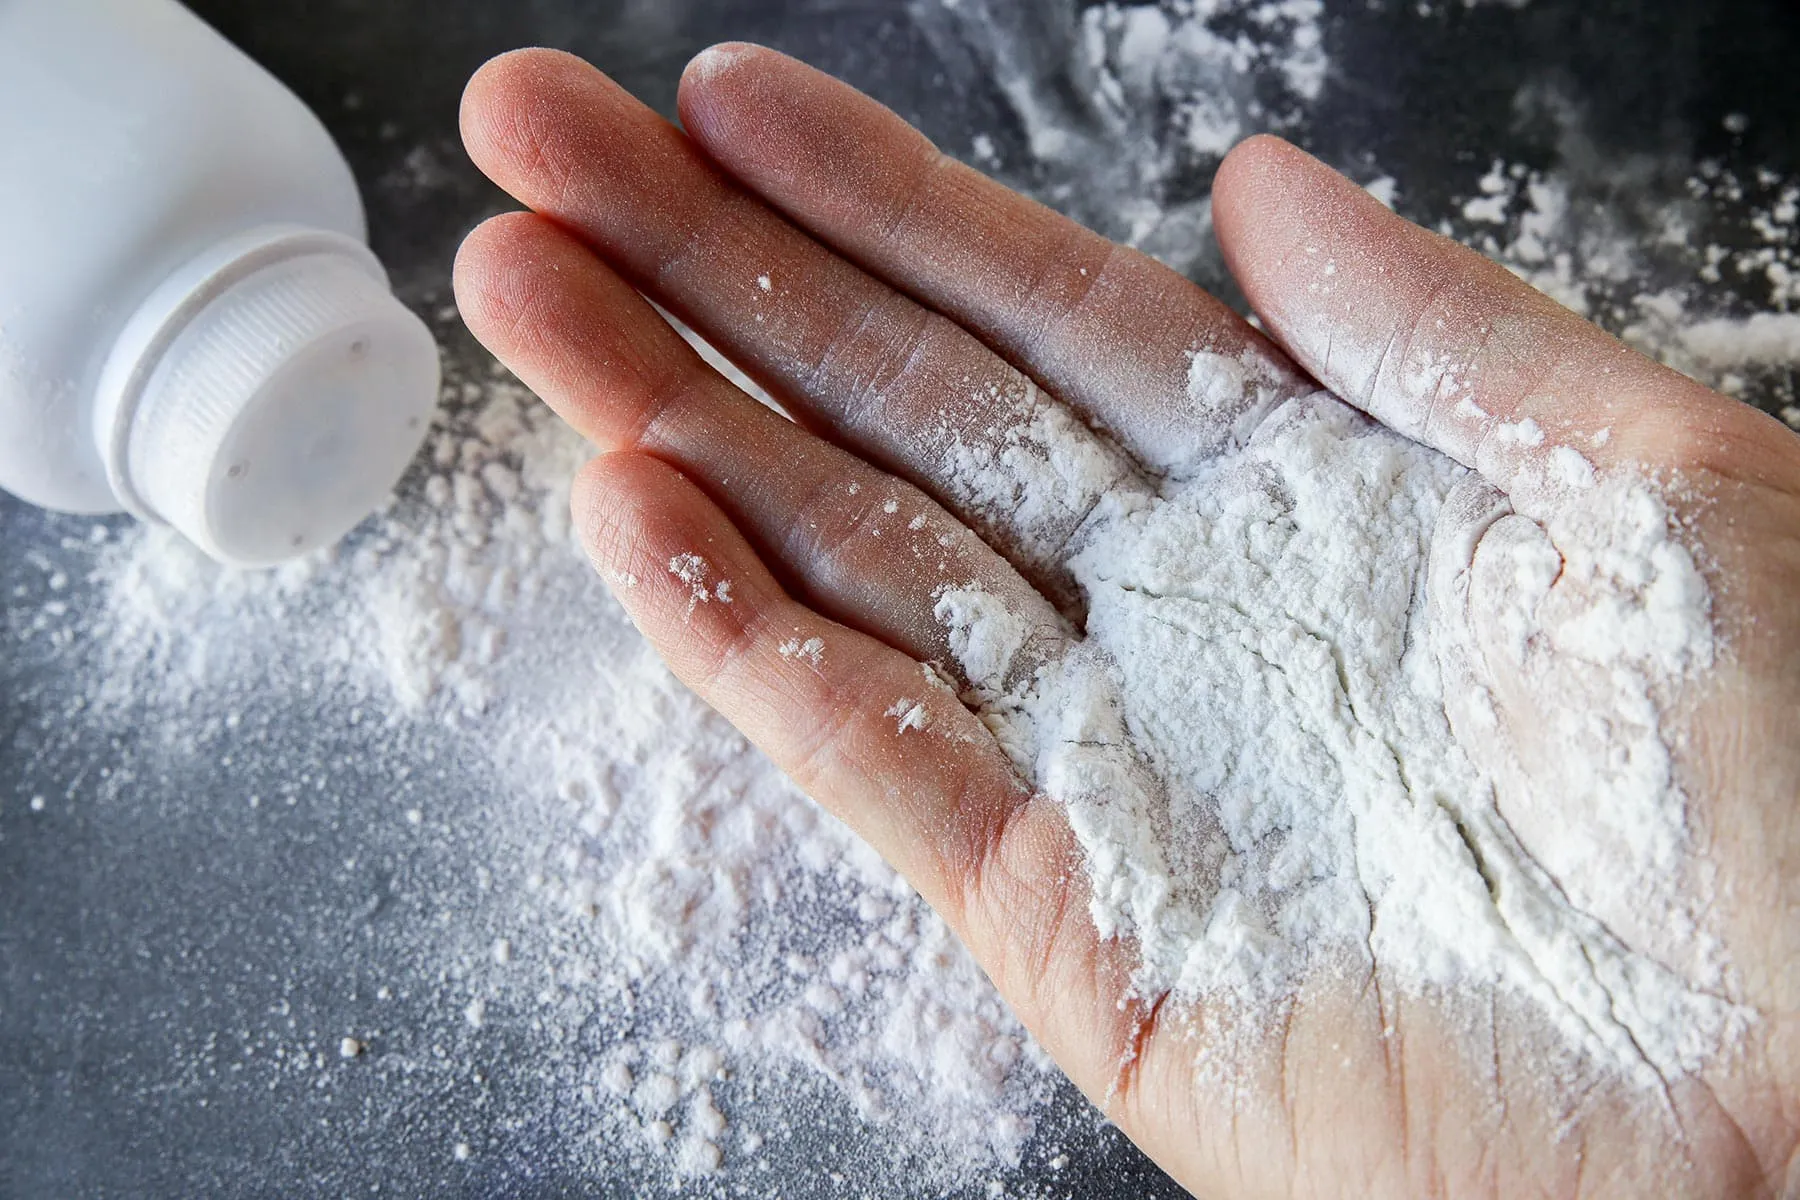 J&J Offers $8.9 Billion to Settle Baby Powder Claims